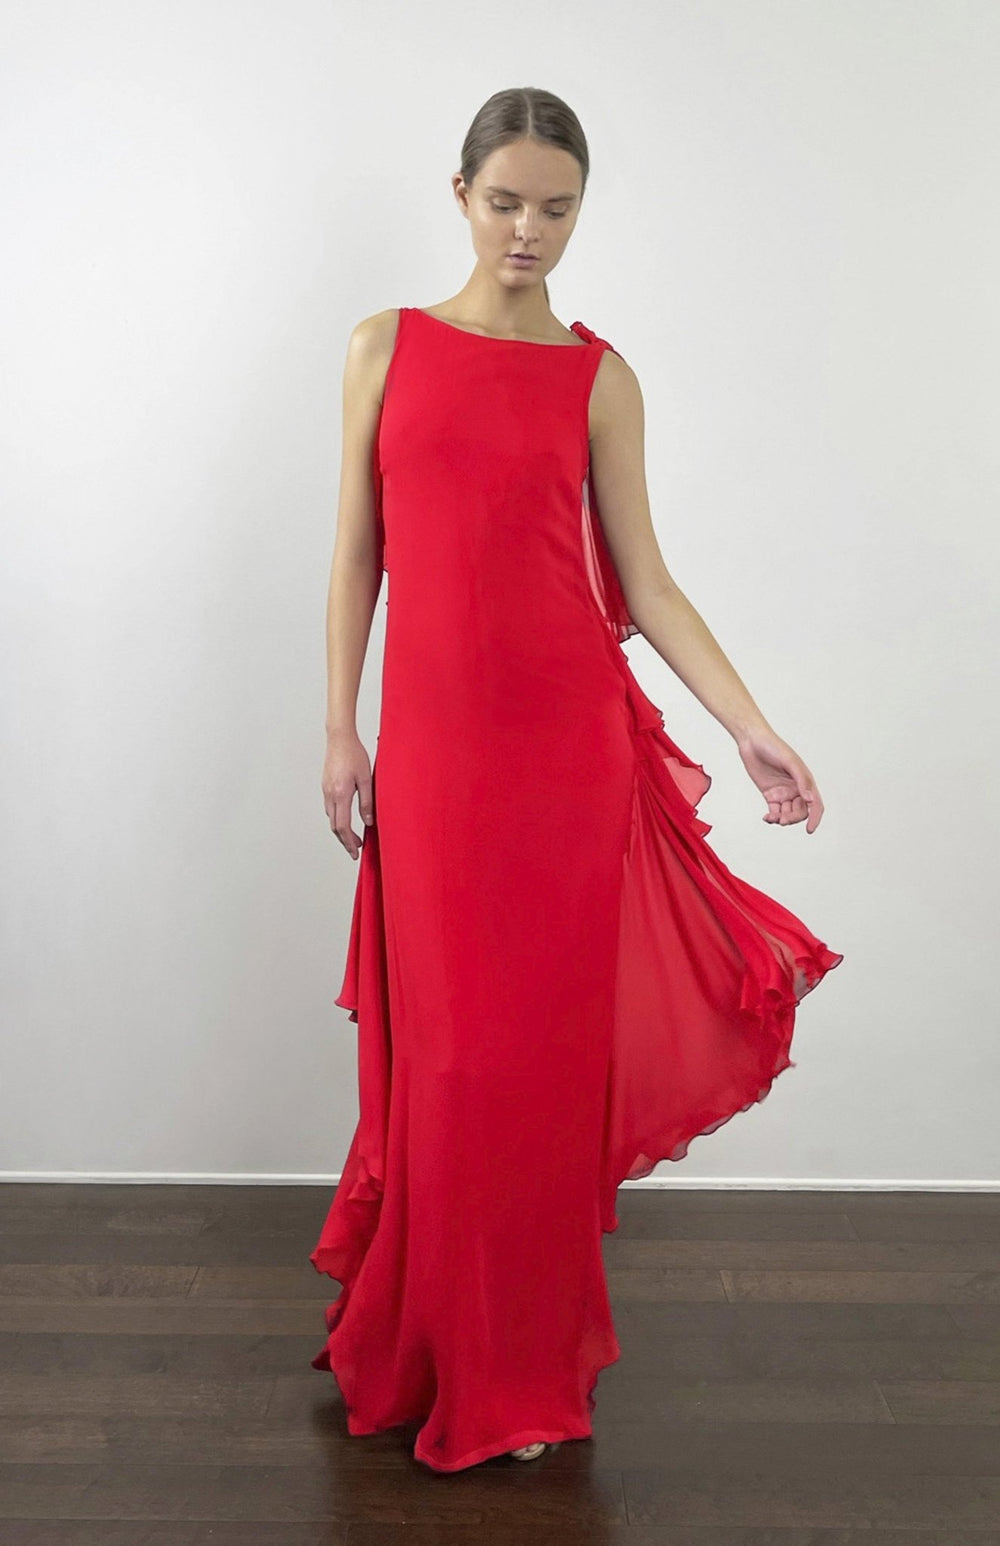 Limited edition red long evening dress or red carpet gown in silk georgette with sheer back and draped frills 